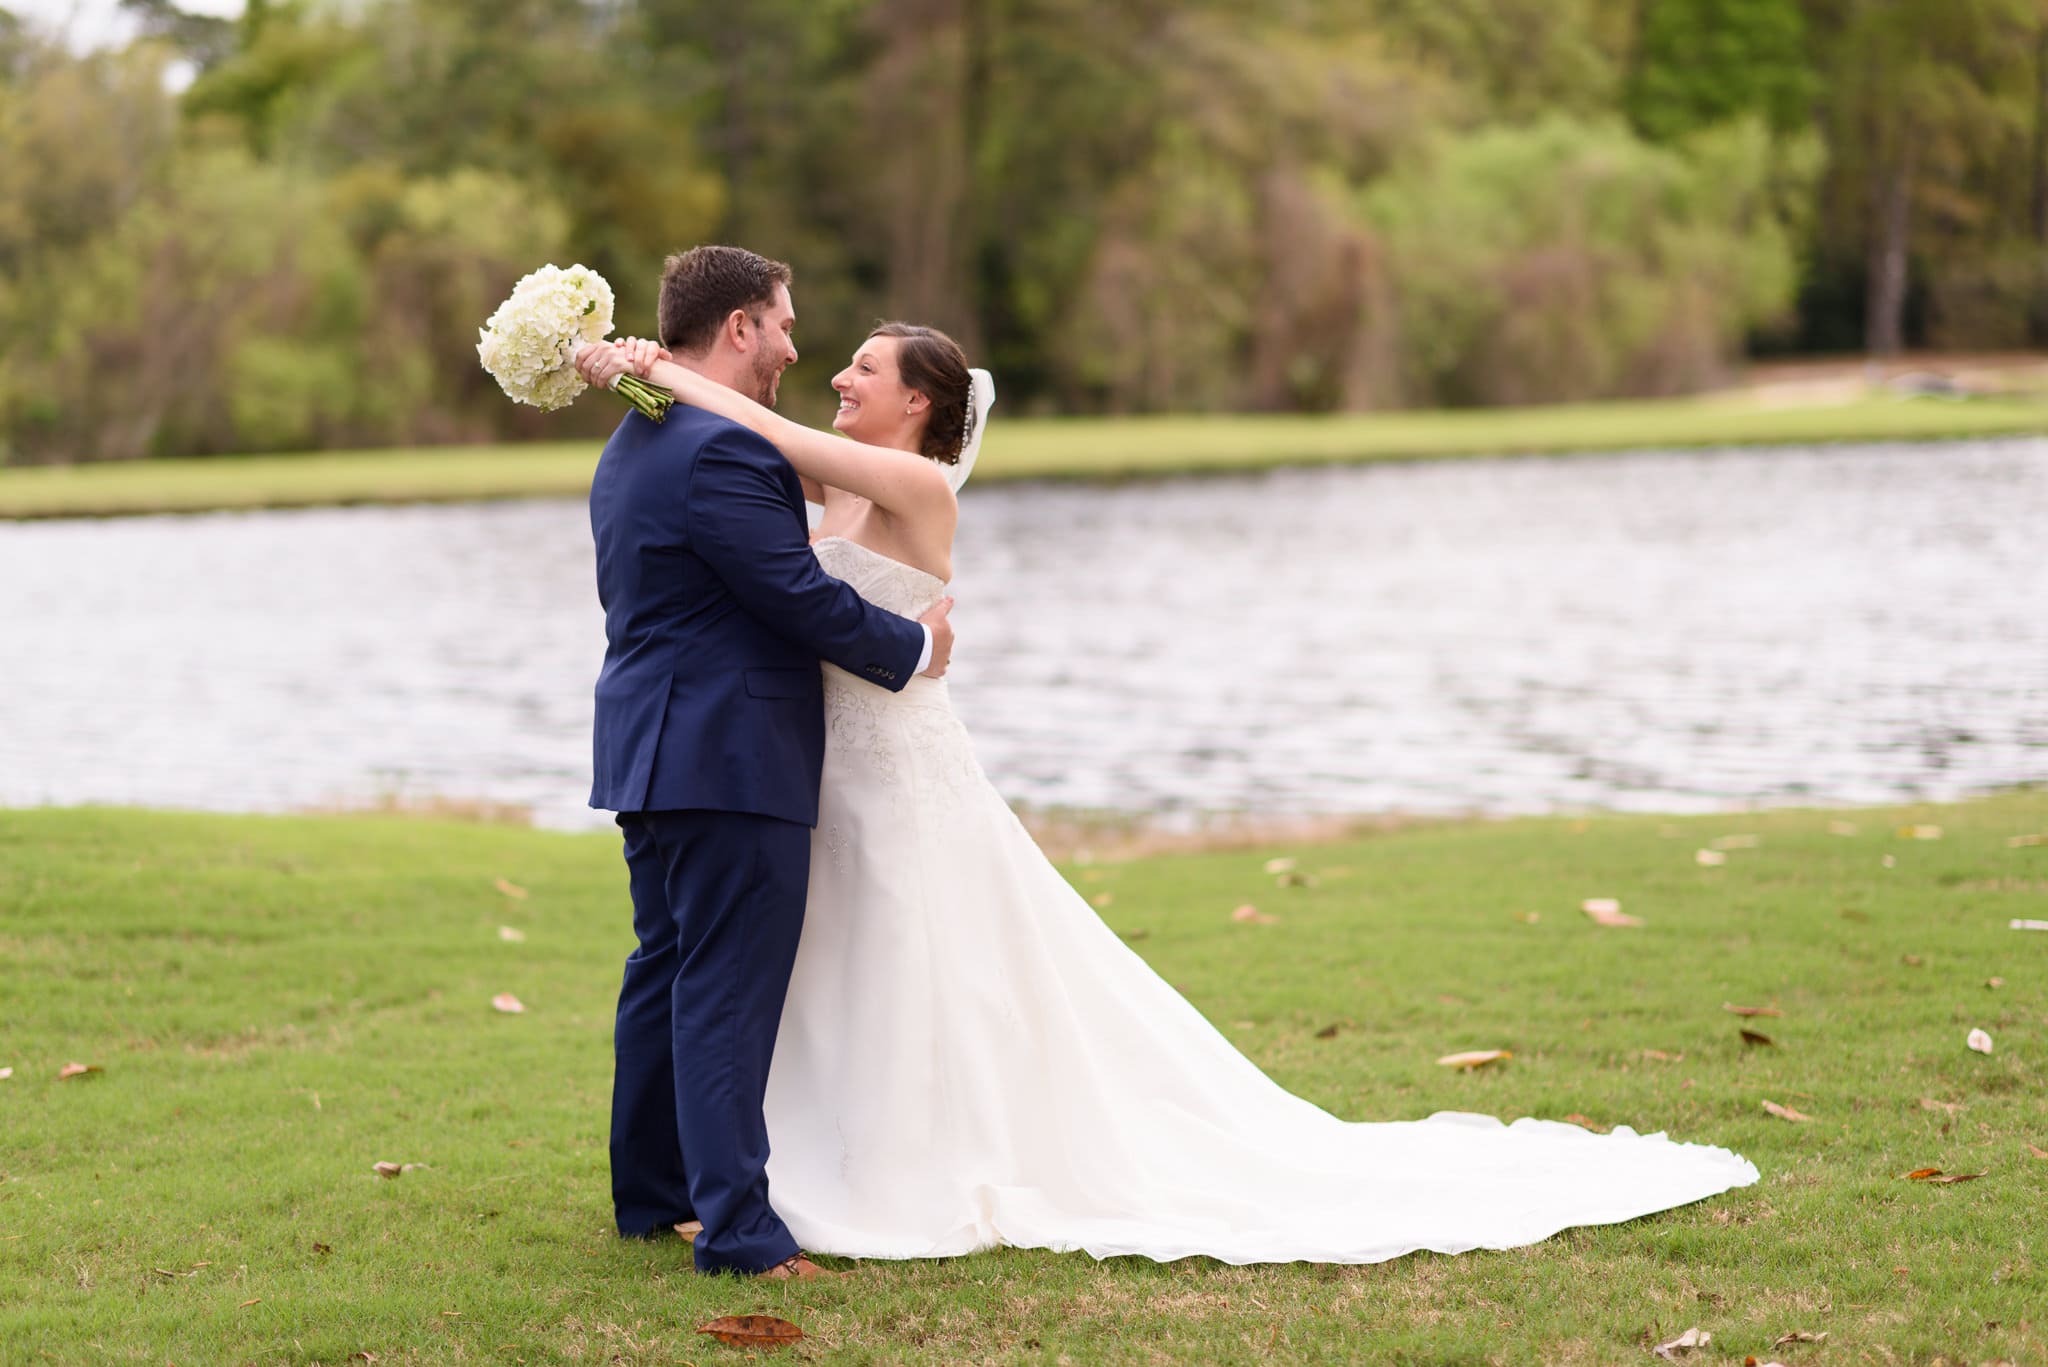 Fun before ceremony pictures with bride and groom - Pawleys Plantation